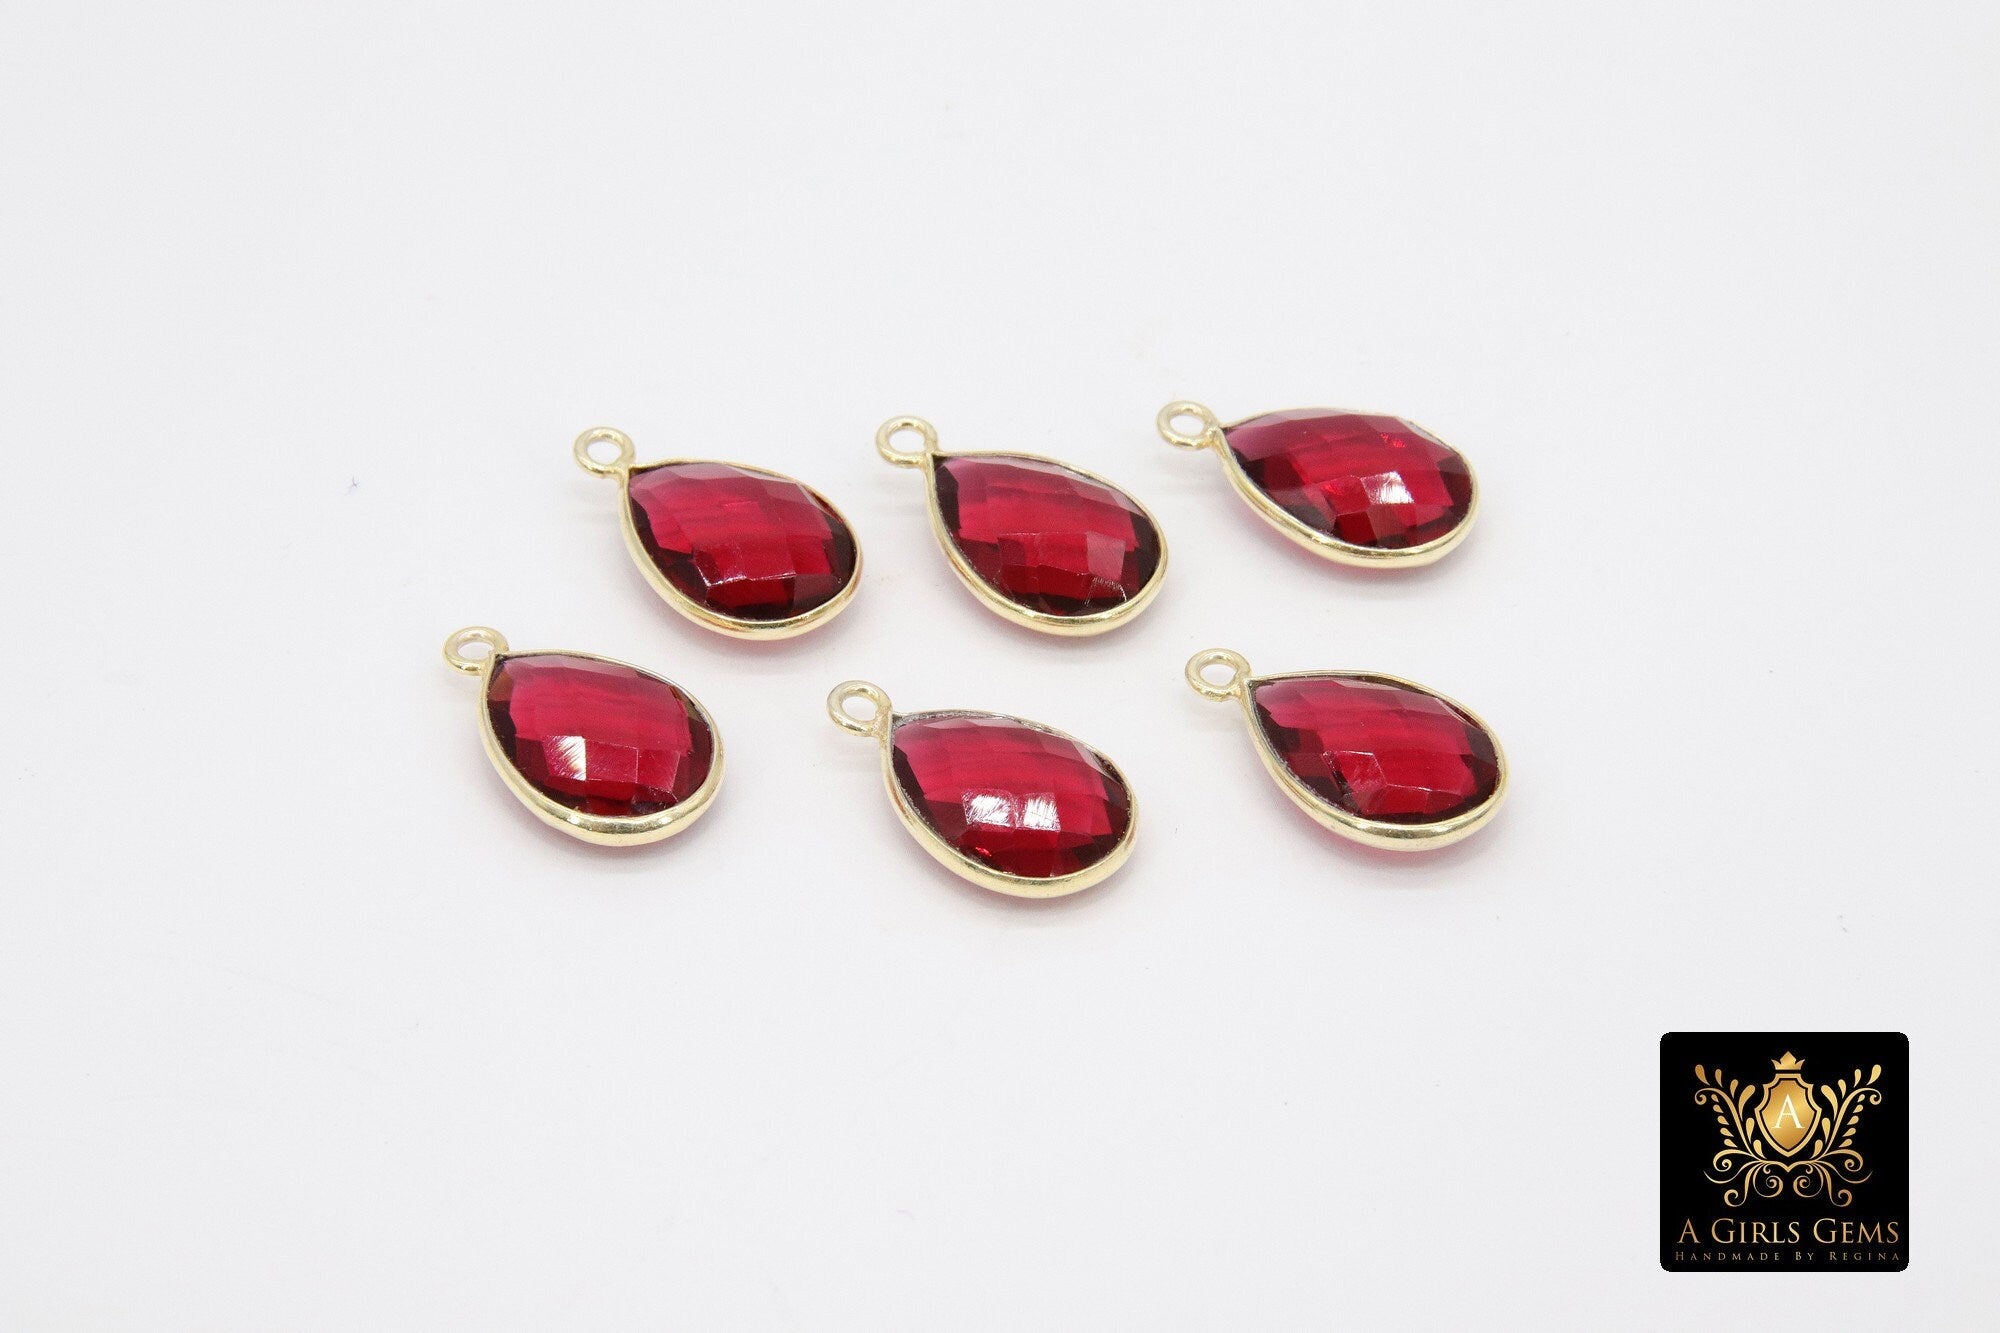 Pink Tourmaline Teardrop Charms, Gold Plated Oval Pink Gemstones #2855, Sterling Silver Red October Birthstone